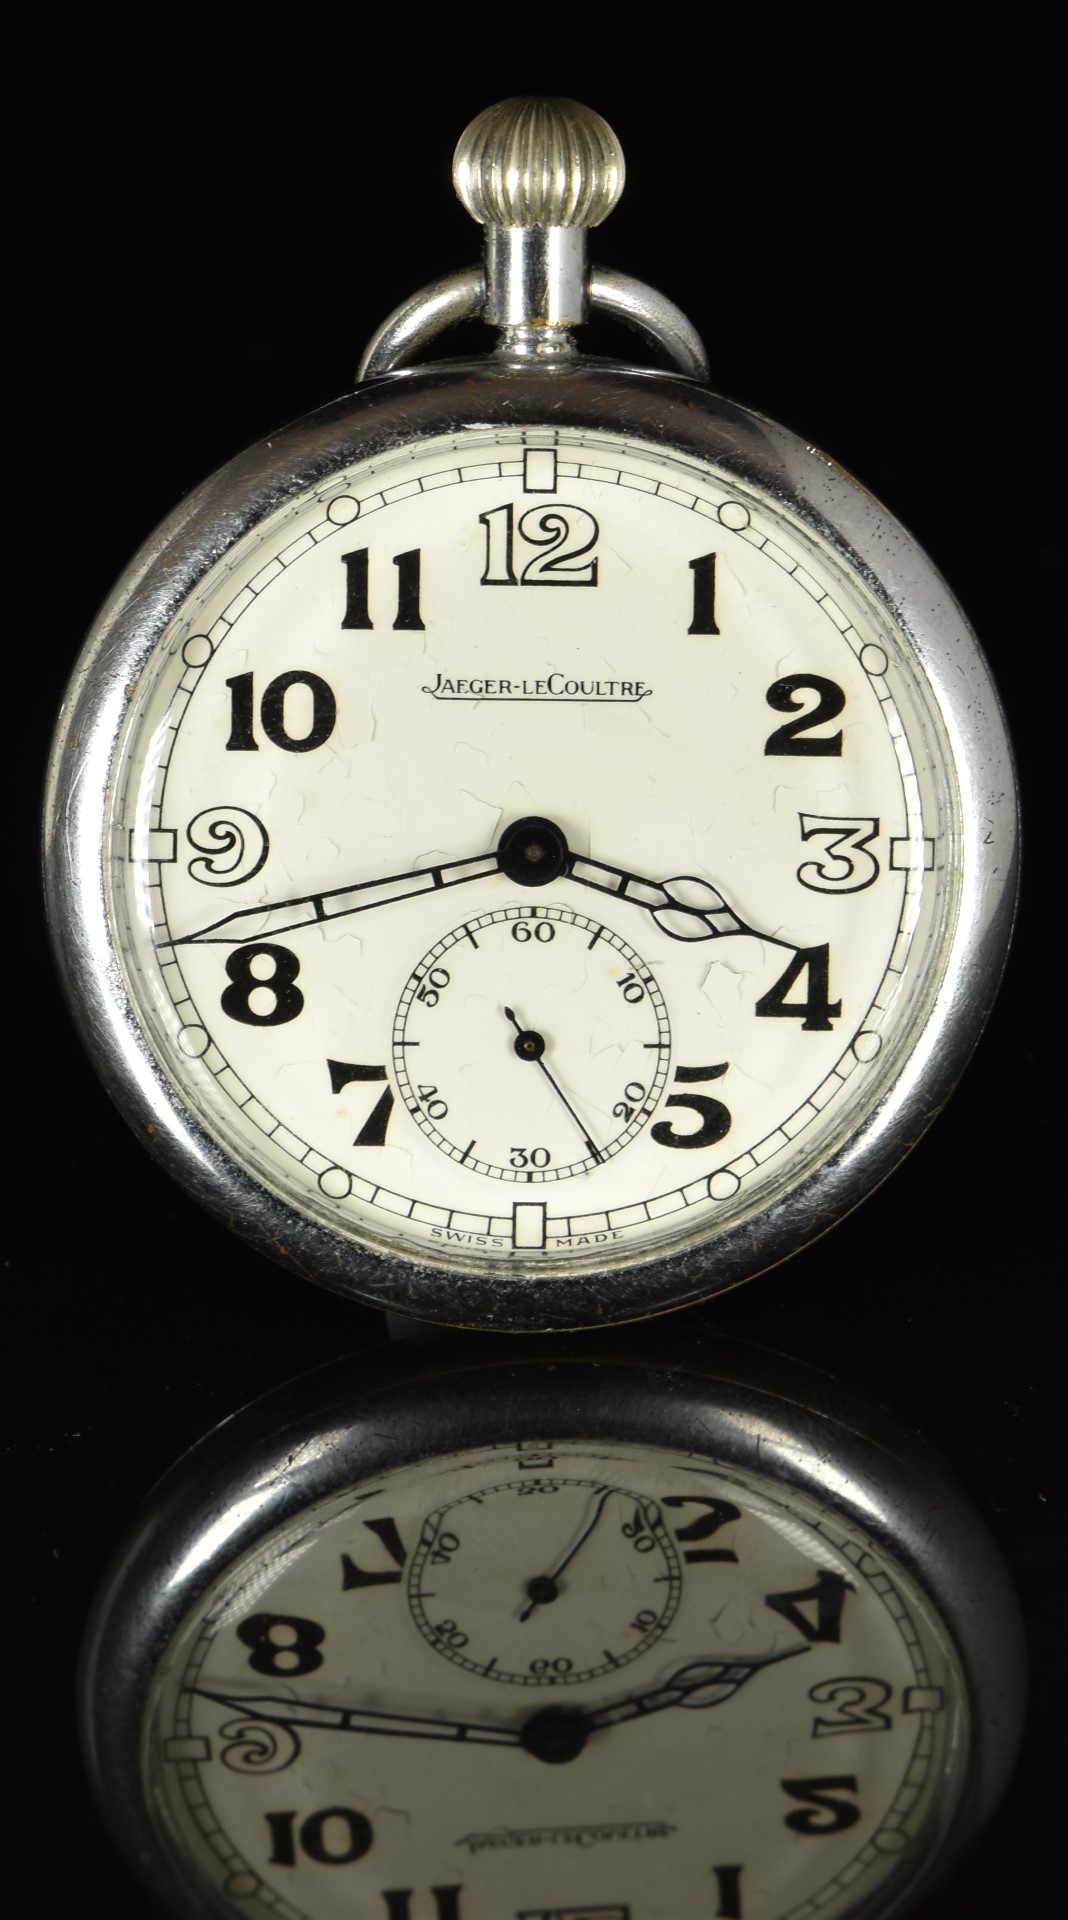 Jaeger LeCoultre keyless winding open faced military pocket watch with inset subsidiary seconds